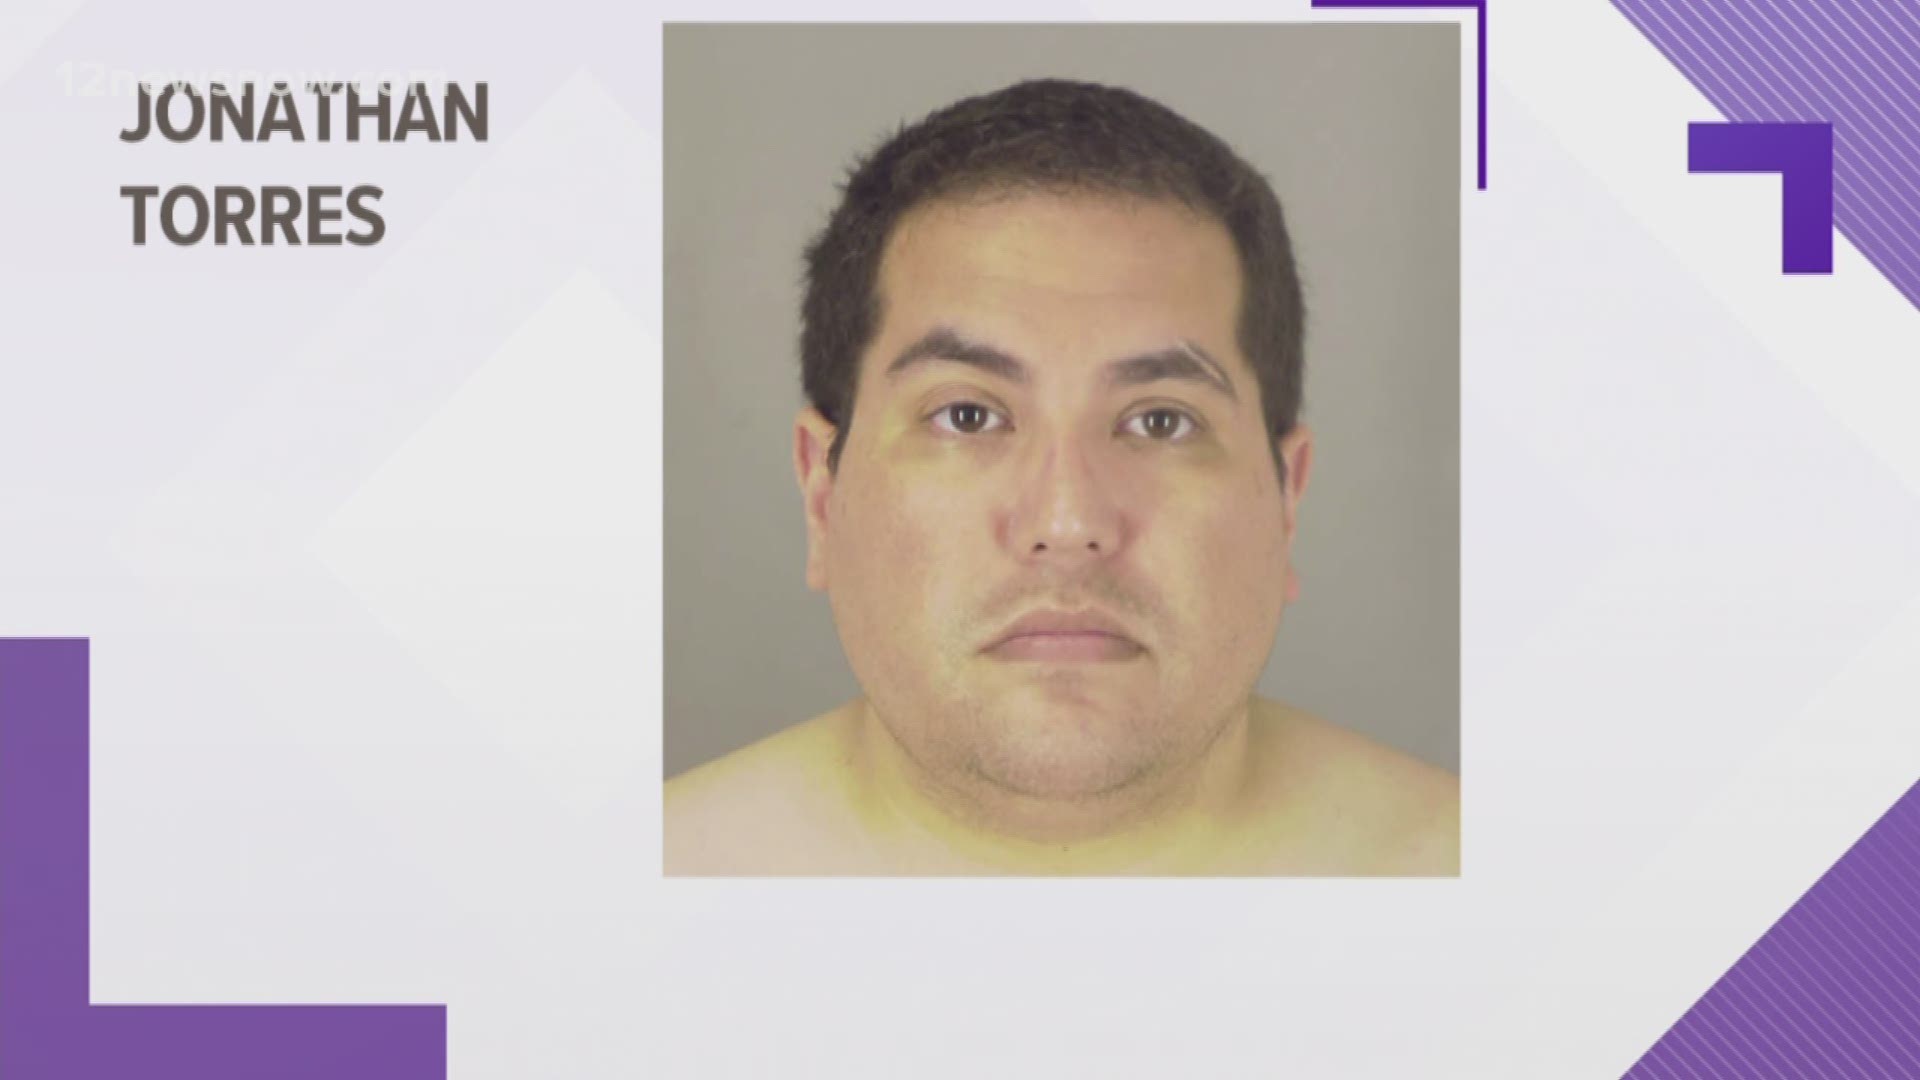 What we know about Beaumont bombing suspect Jonathan Torres